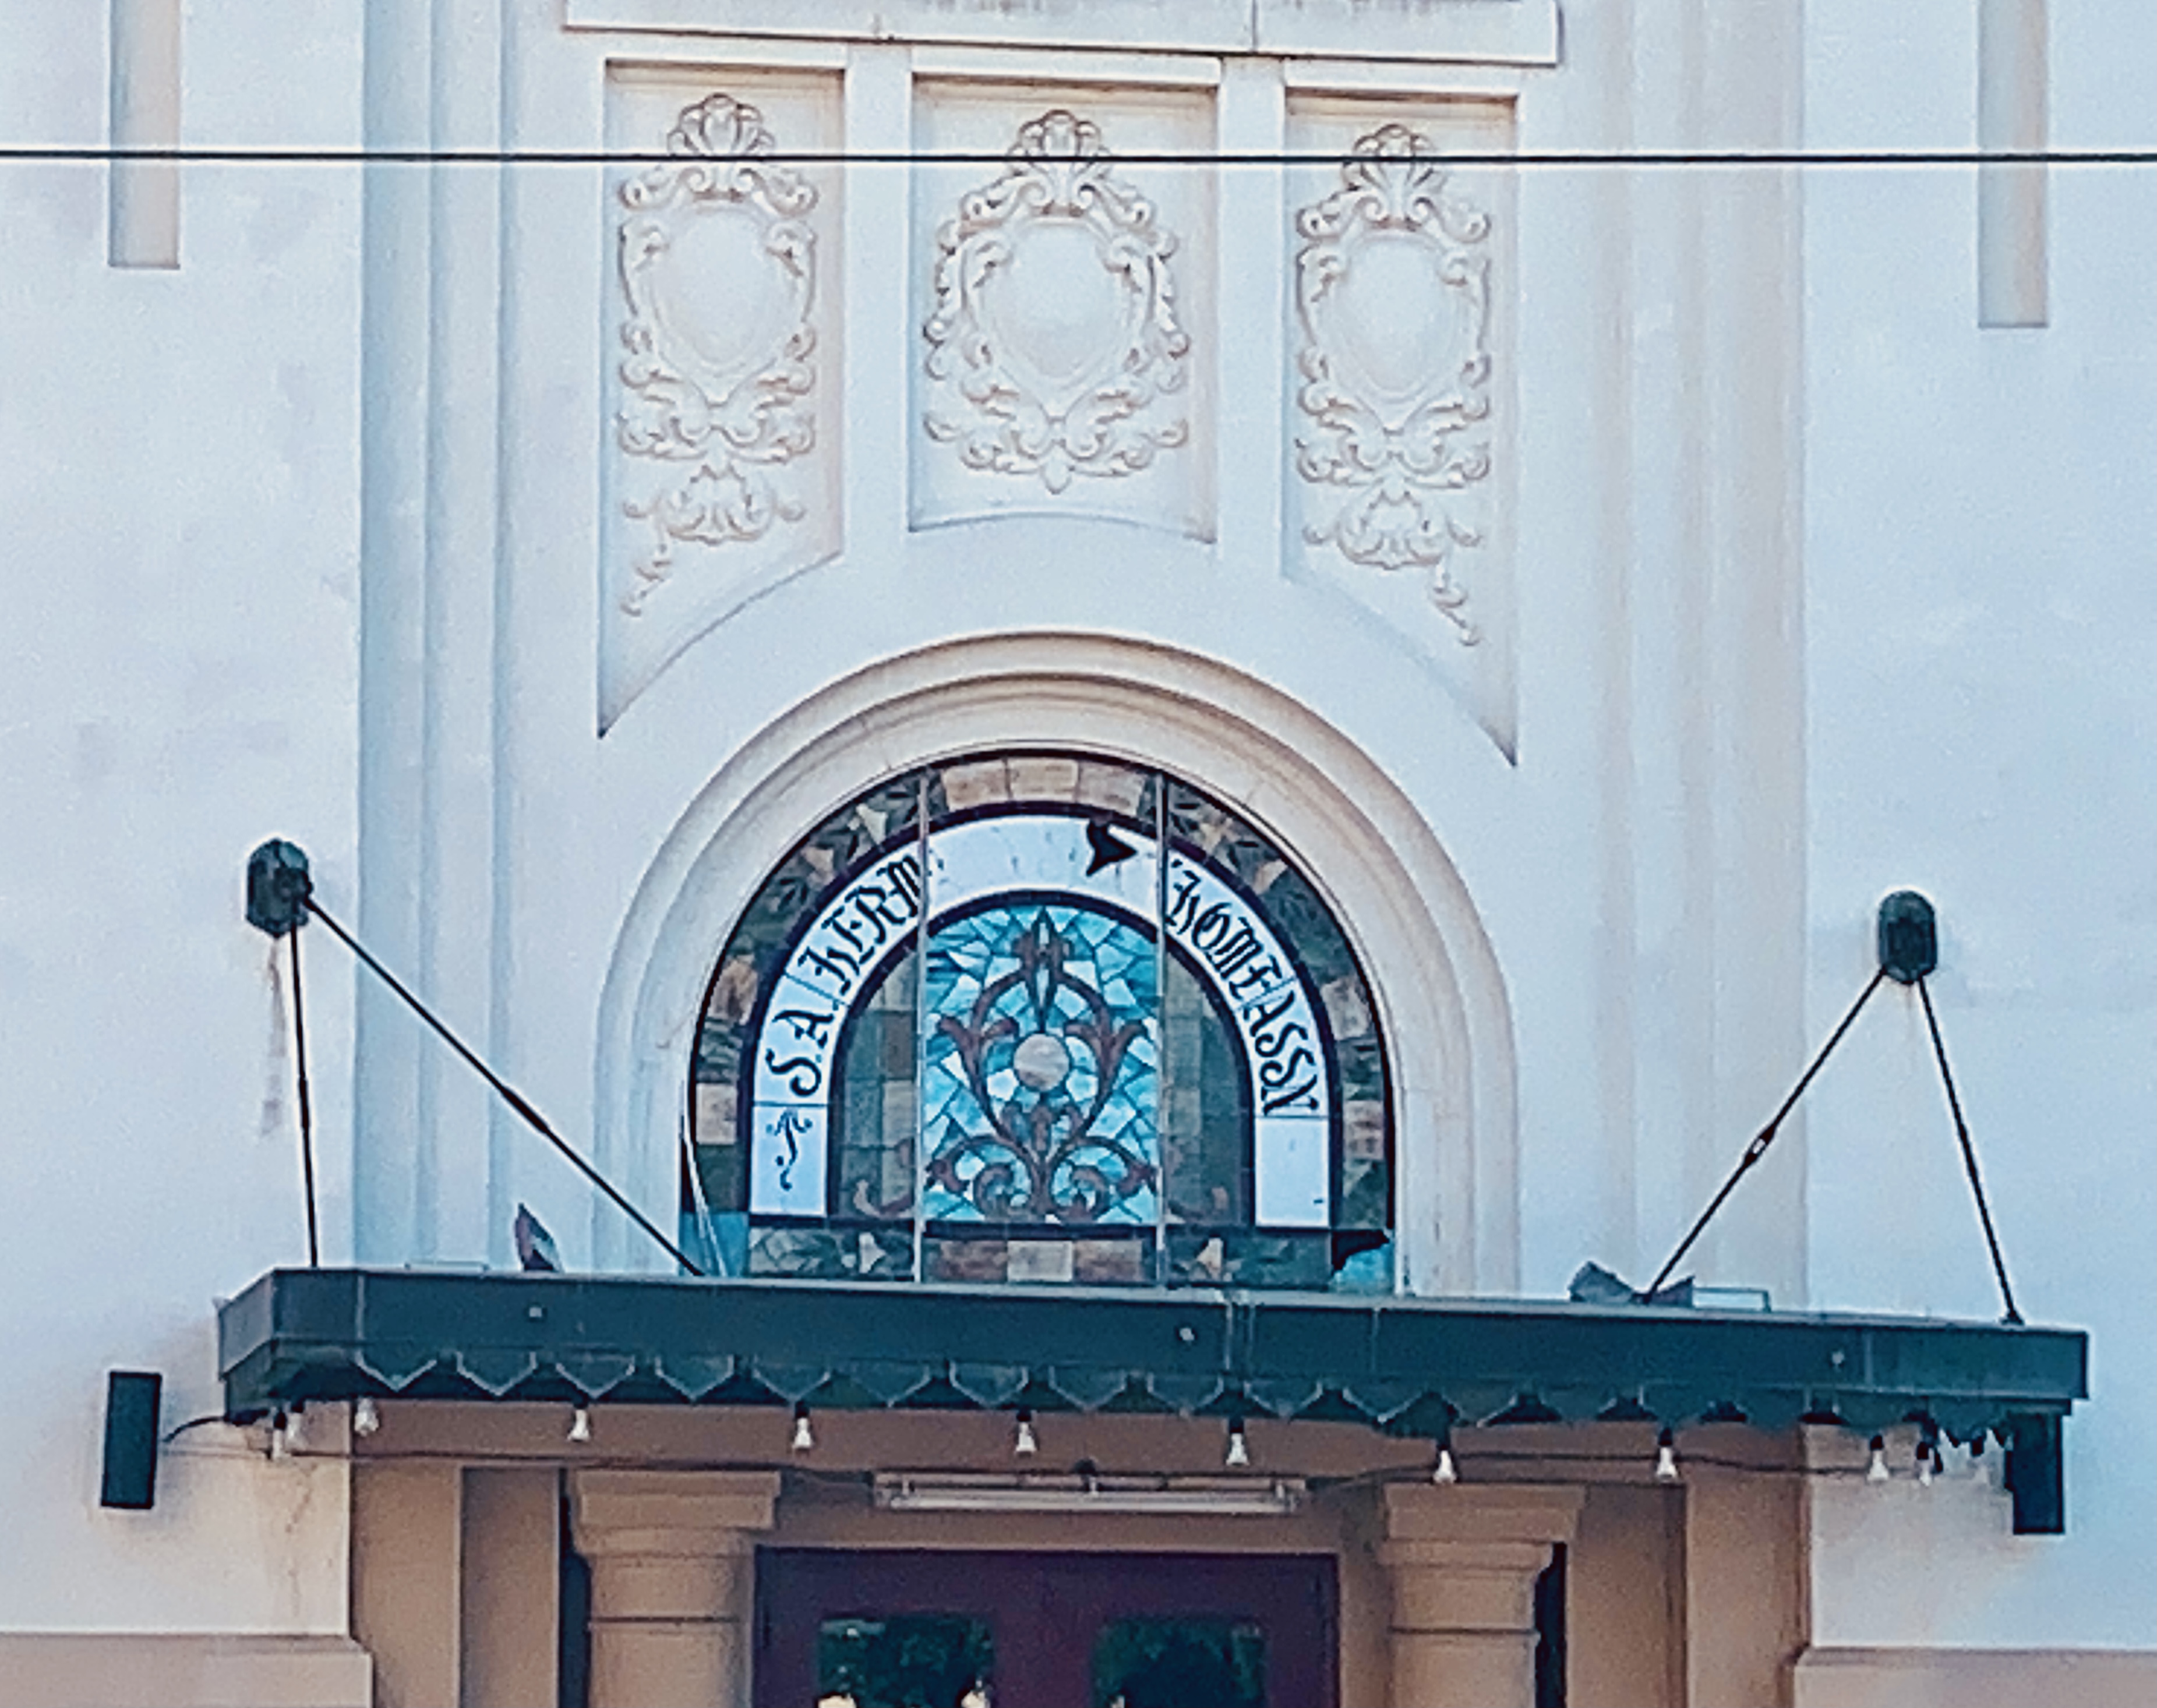 Arched stained glass window above entrance to Hermann Sons building.